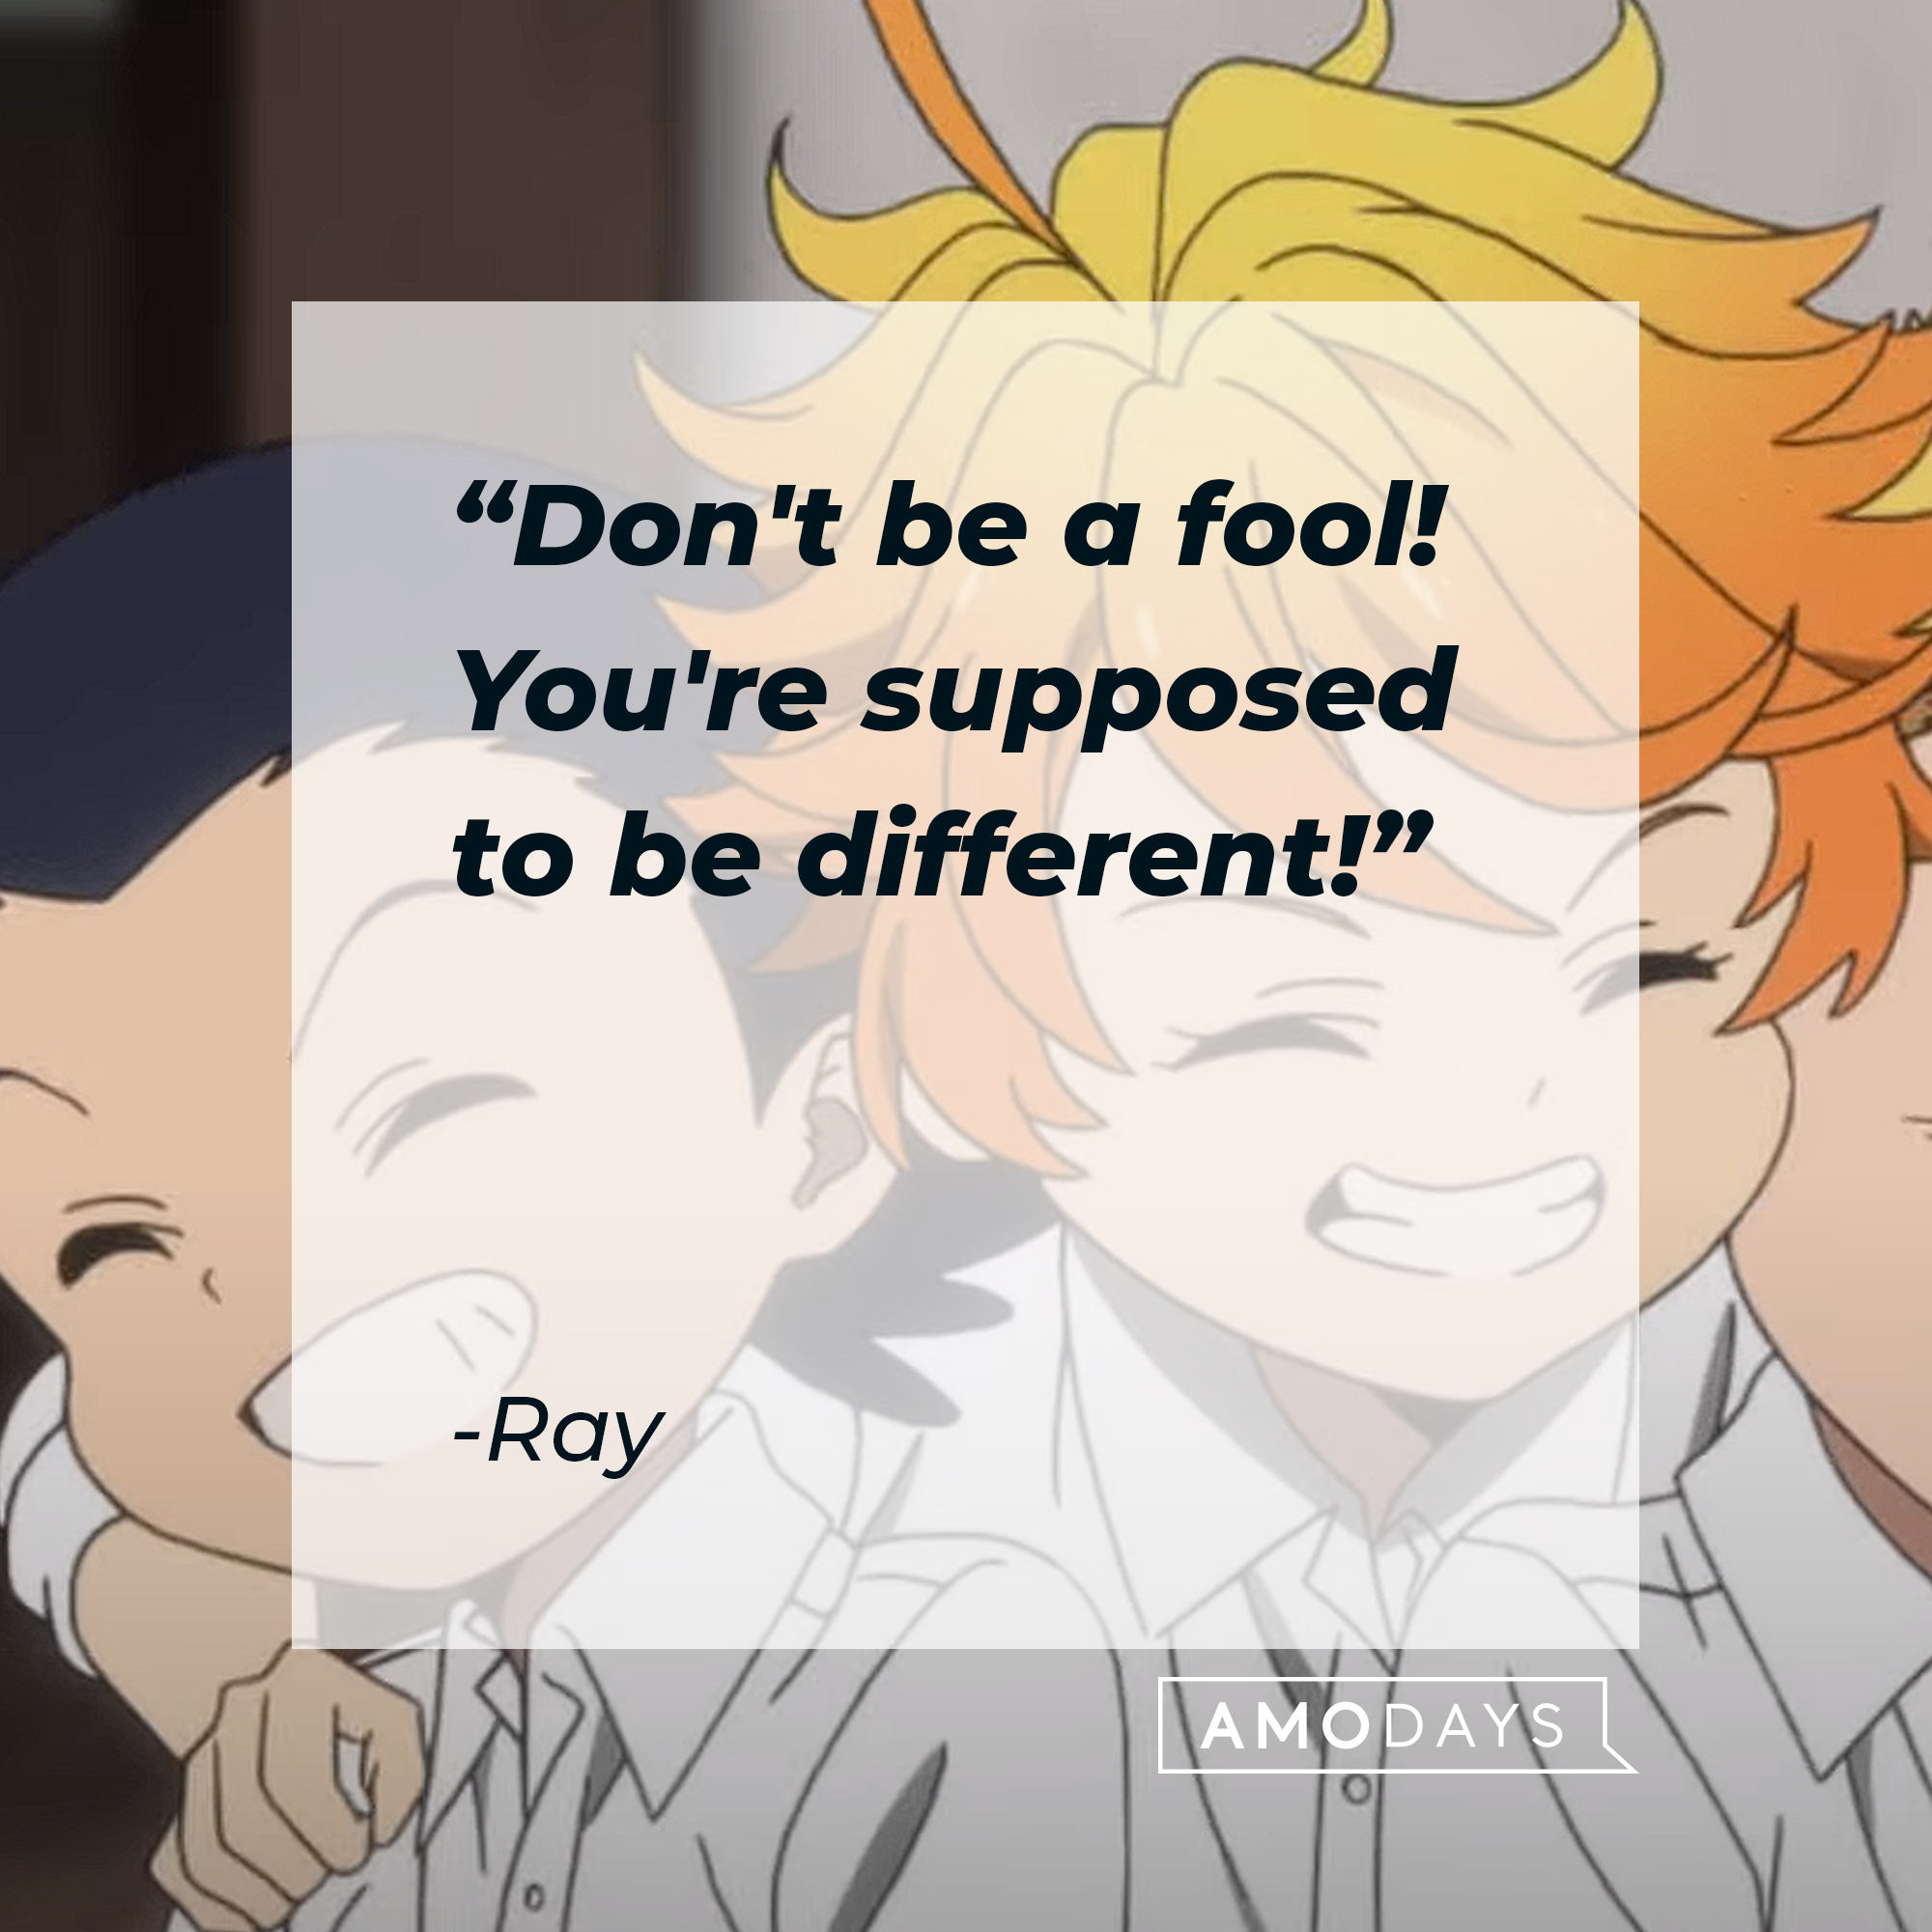 An image from the series “Promise Neverland” with Ray’s quote: “Don't be a fool! You're supposed to be different!" | Source: youtube.com/AniplexUSA